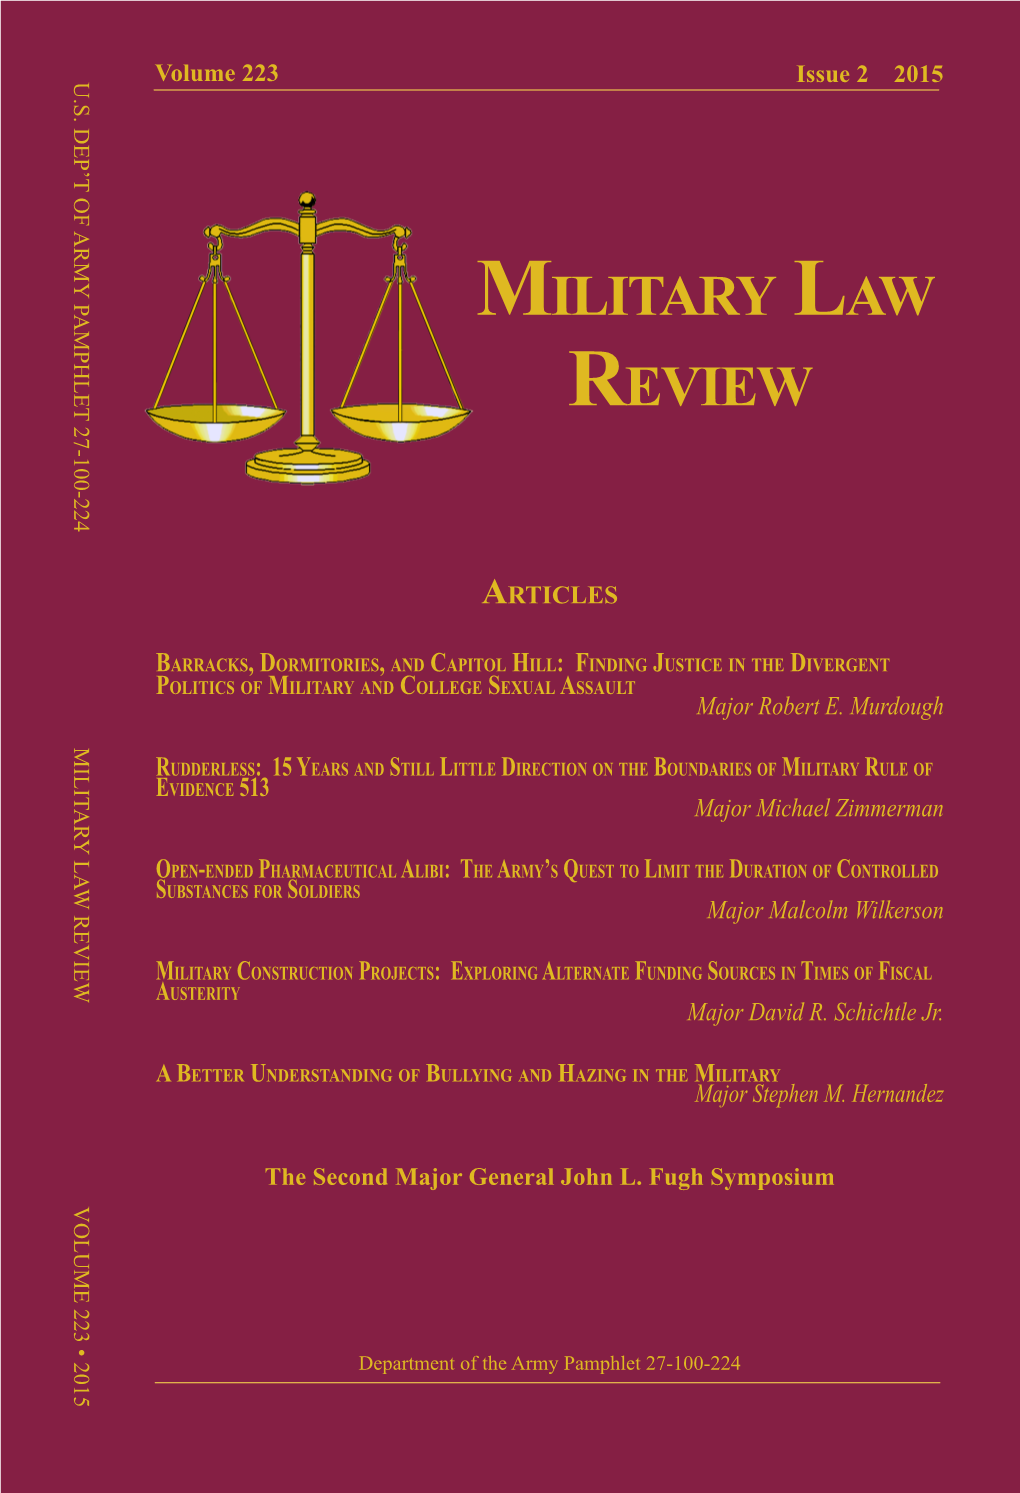 Military Law Review, Volume 223, Issue 2, 2015